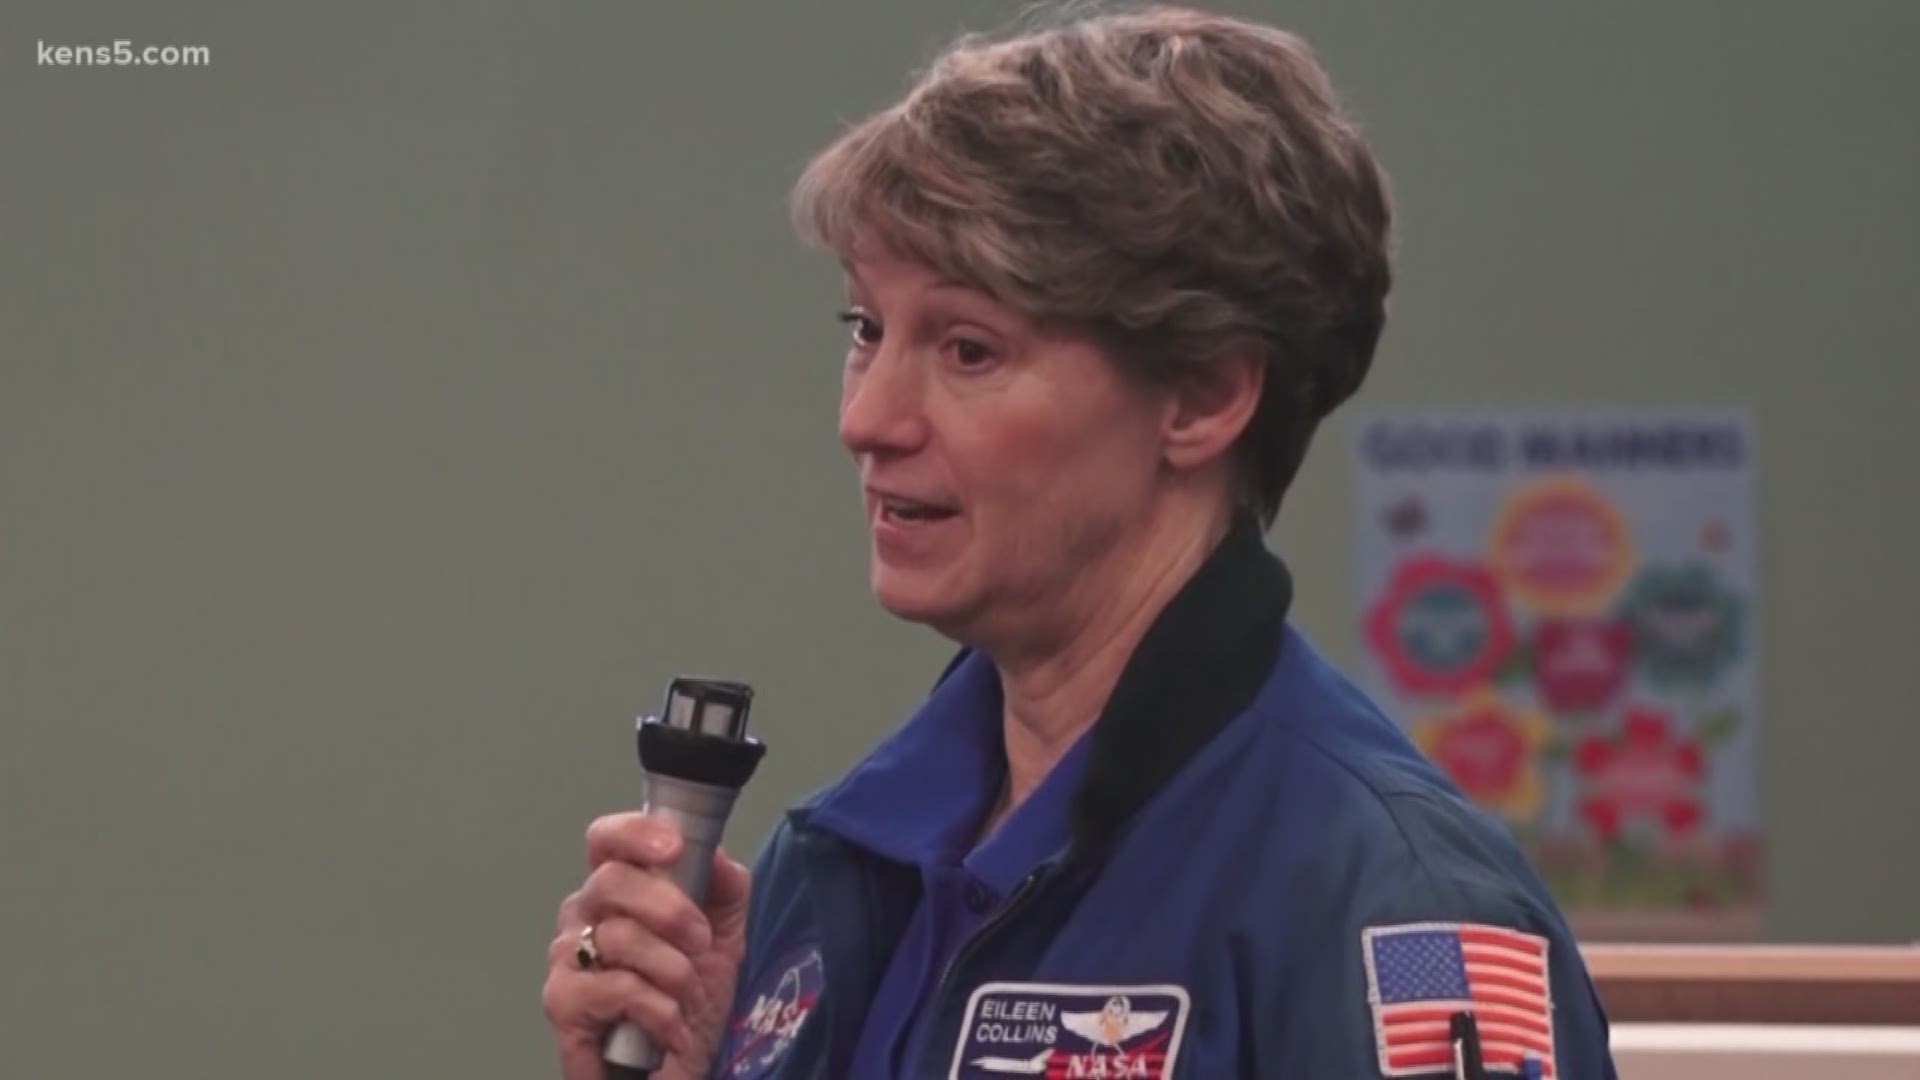 New dreams are taking flight, thanks to Eileen Collins, a NASA trailblazer who calls San Antonio home. Local Girl Scouts learned about careers in space from the first female shuttle flight commander.